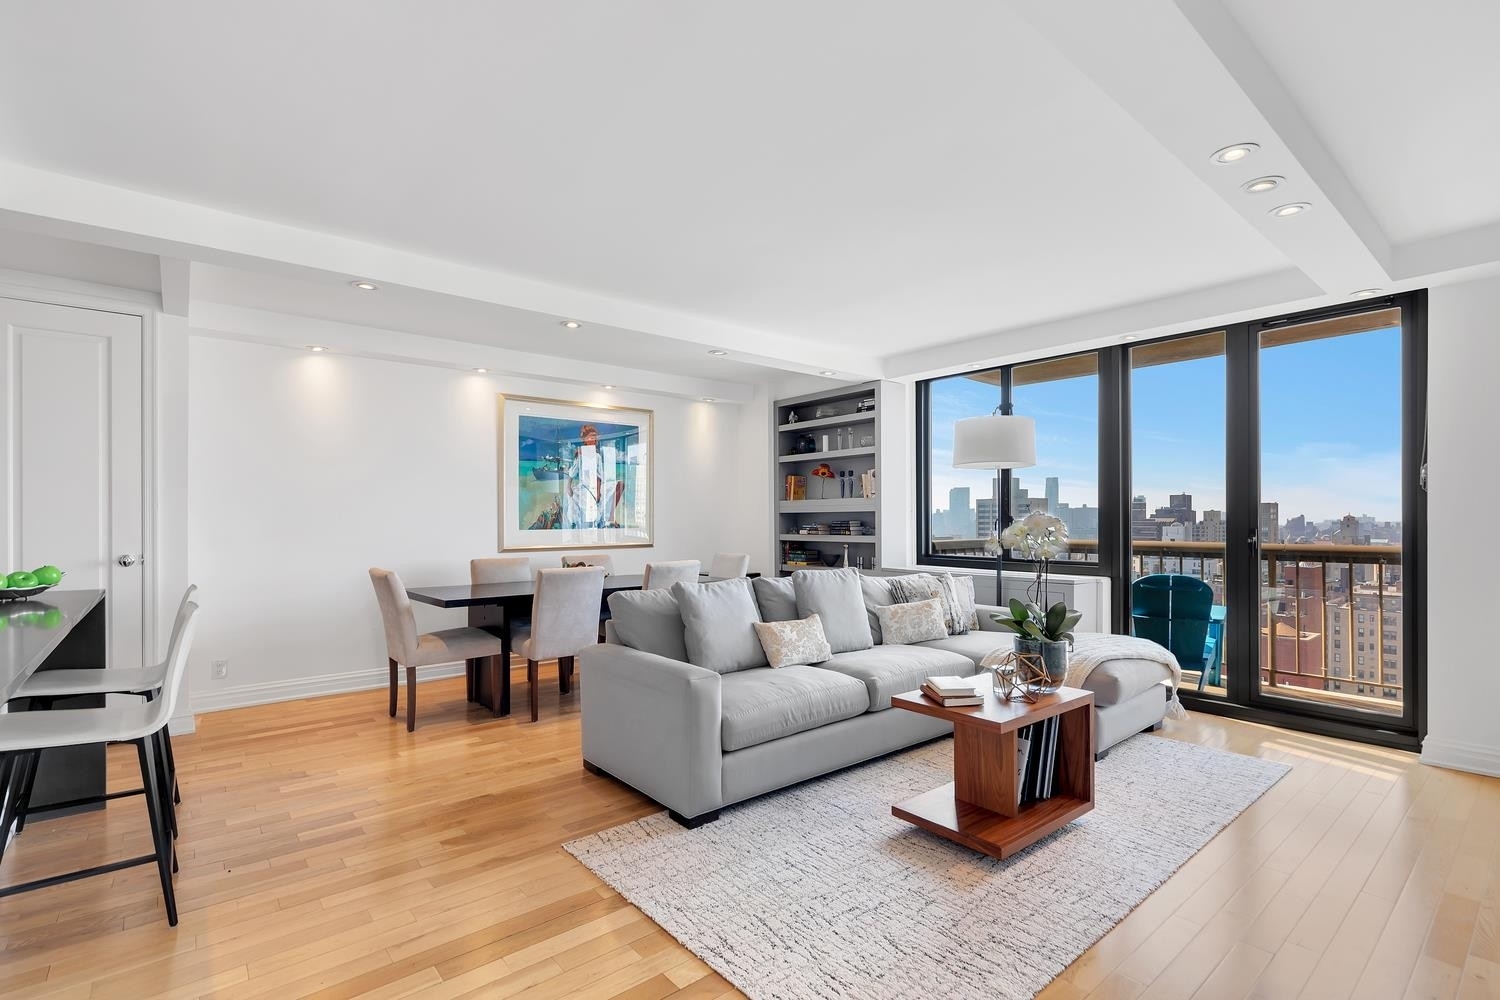 Condominium for Sale at Maison East, 1438 THIRD AVE, 27B Upper East Side, New York, NY 10028